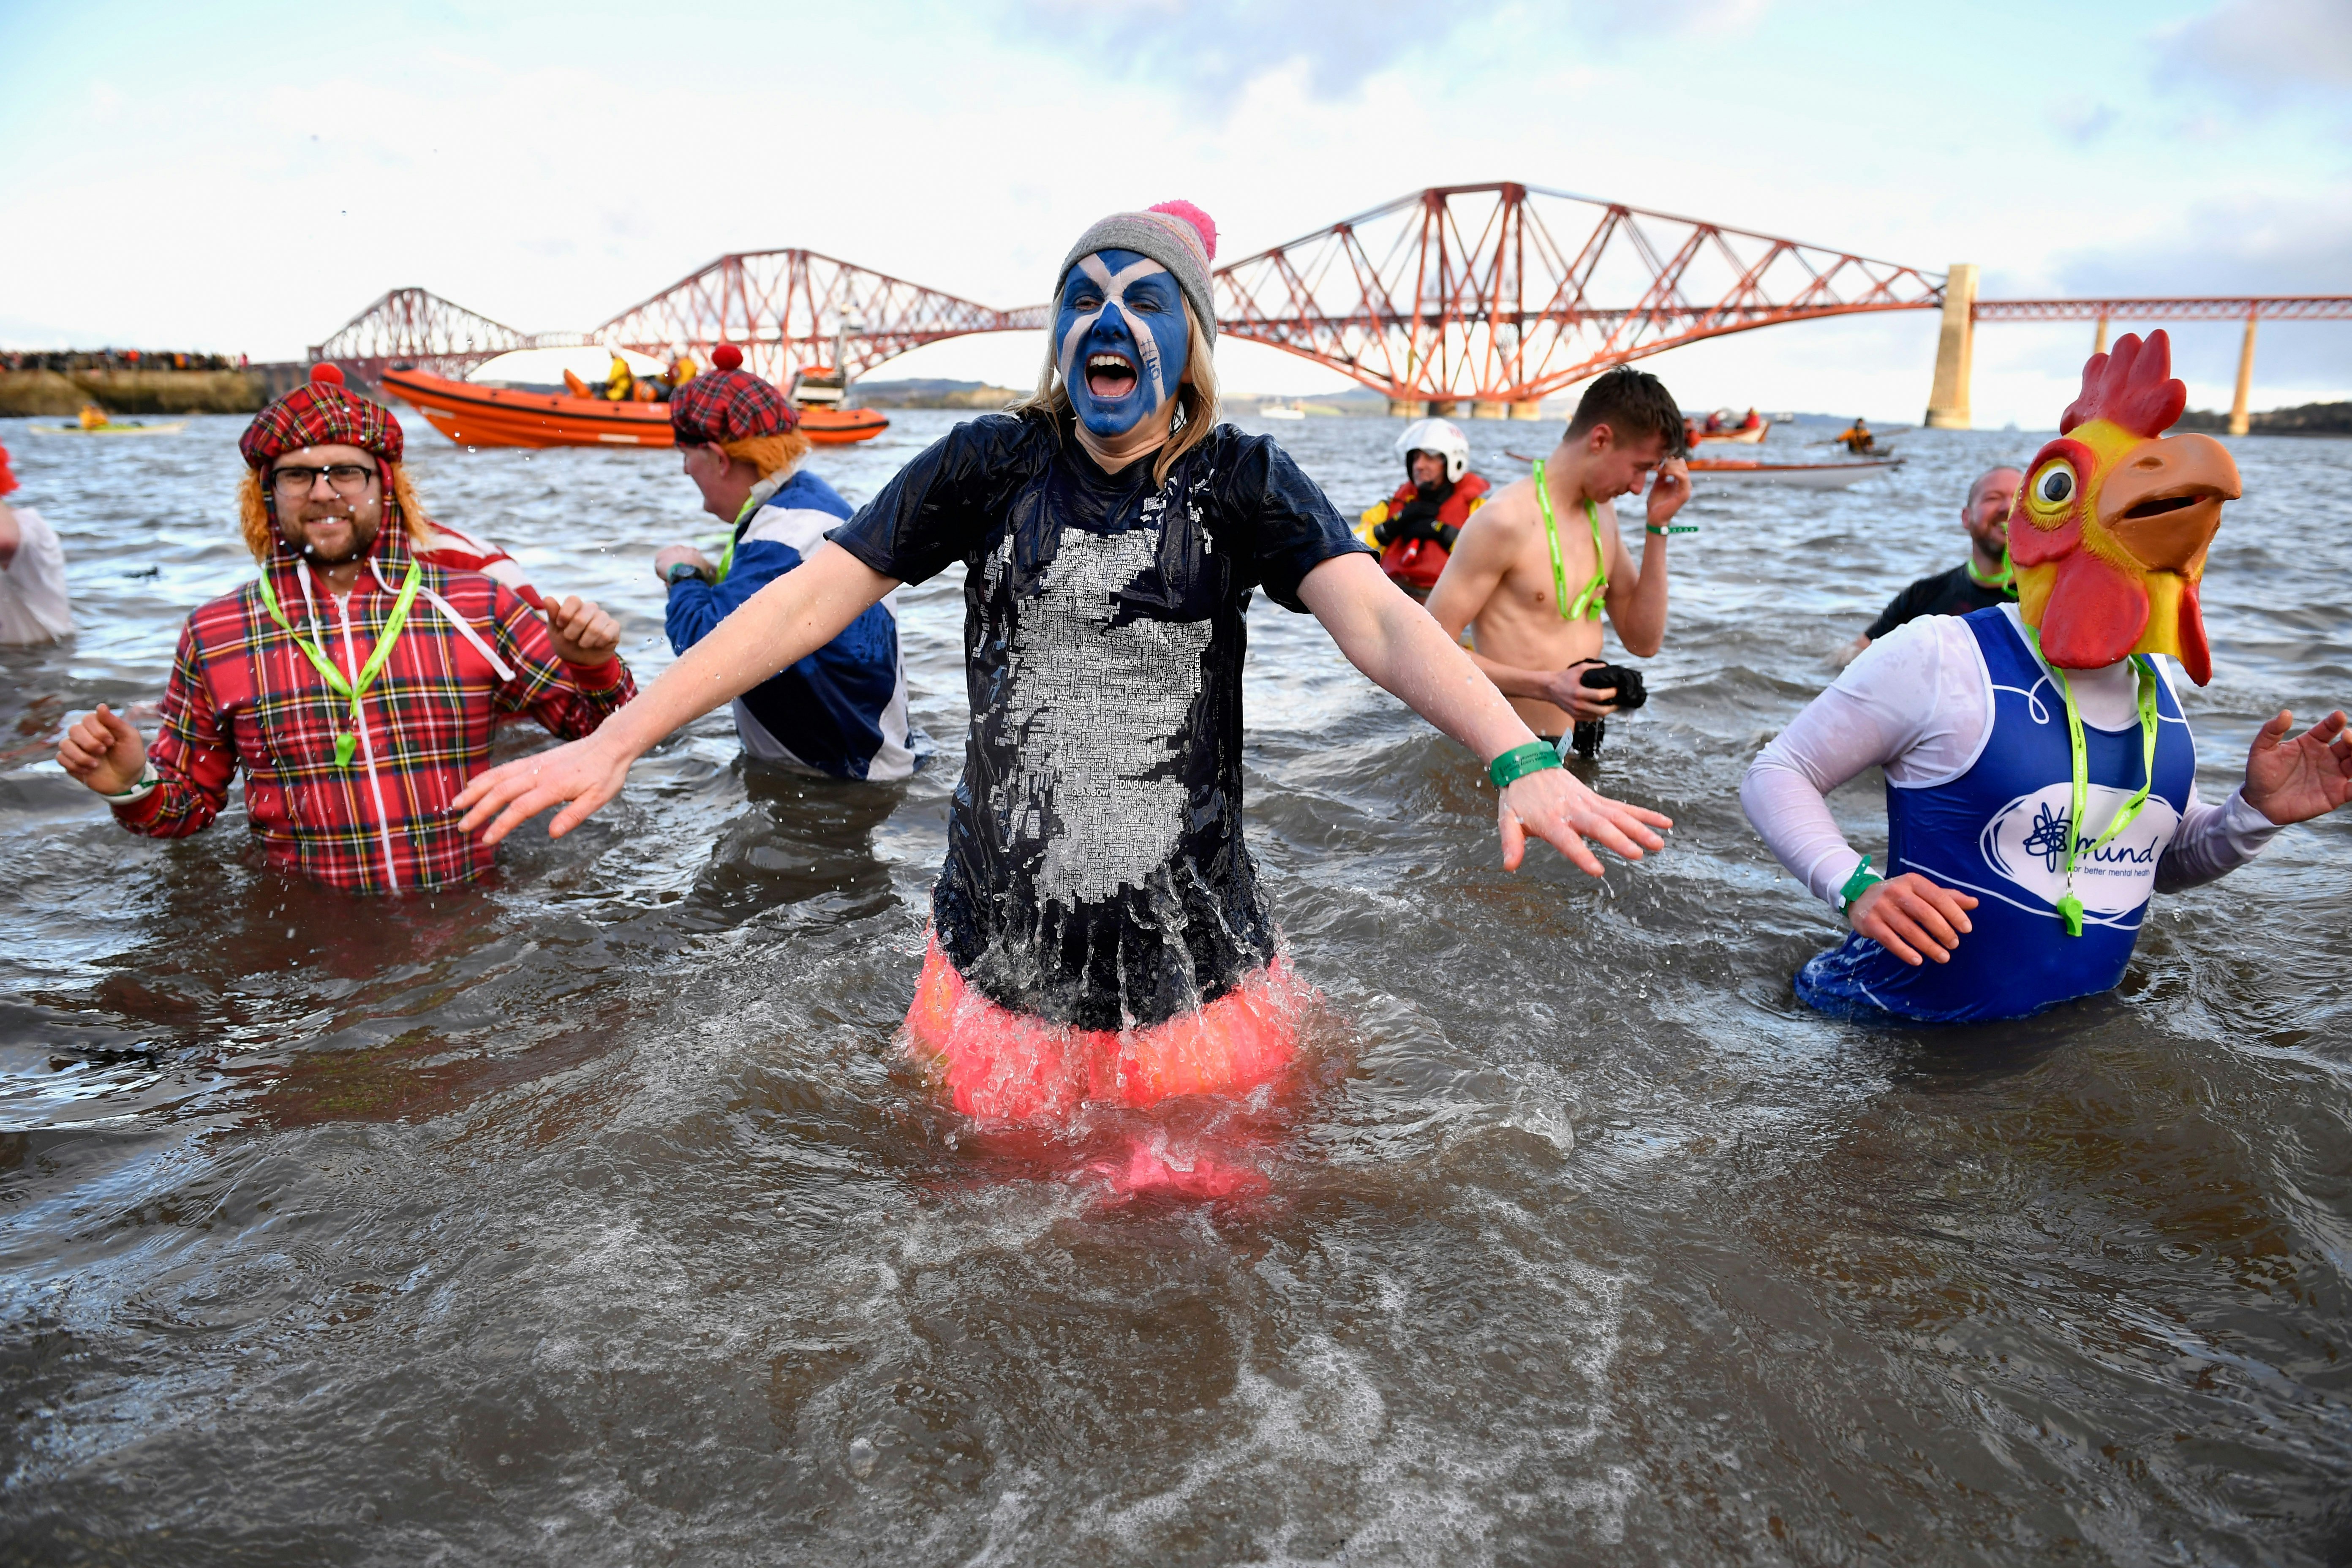 A group of people in fancy dress, one with the Saltire flag painted on their face, are wading in the River Forth and bracing themselves against the cold water. The iconic Forth Bridge can be seen in the background.